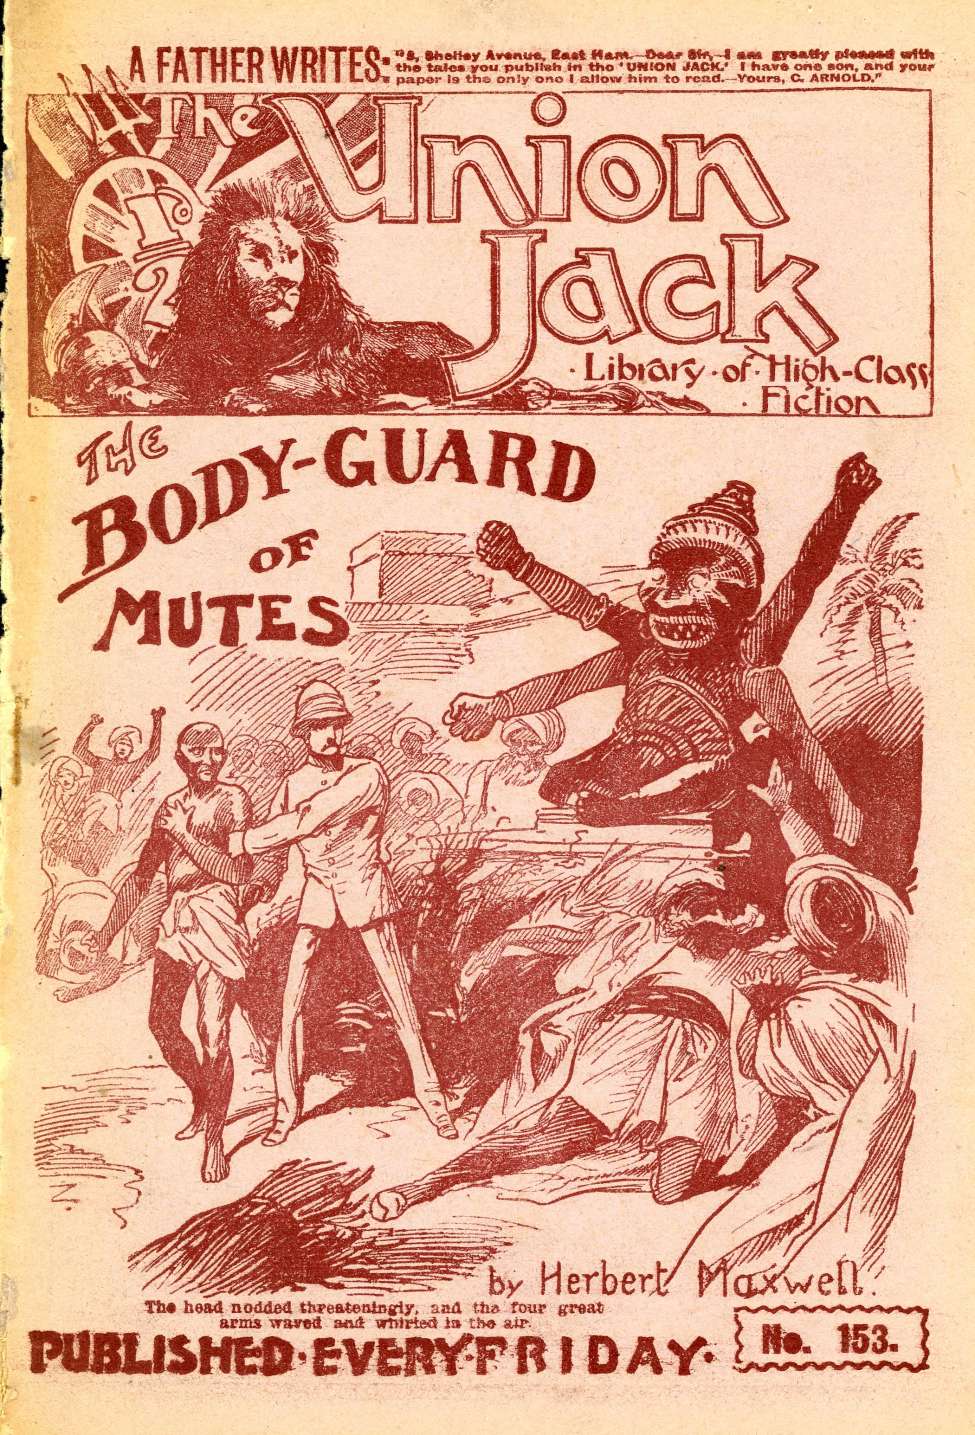 Book Cover For The Union Jack 153 - The Body-Guard of Mutes